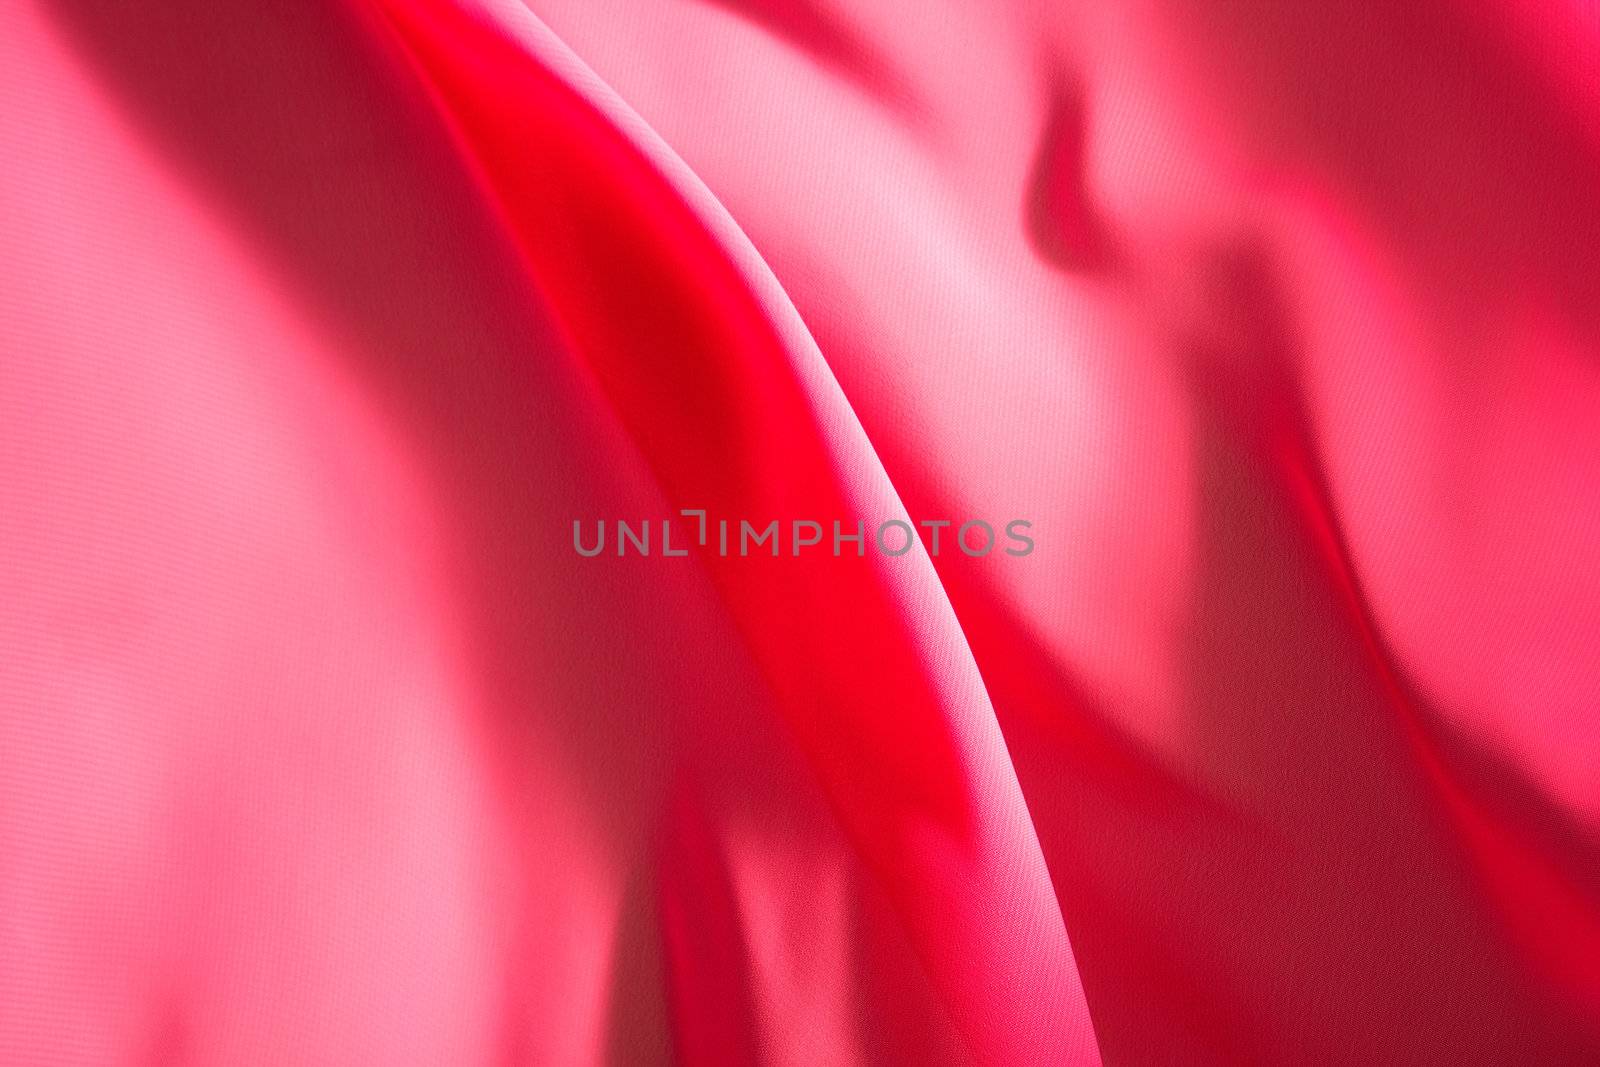 Pink fabric winds waves, creating a beautiful background of the folds